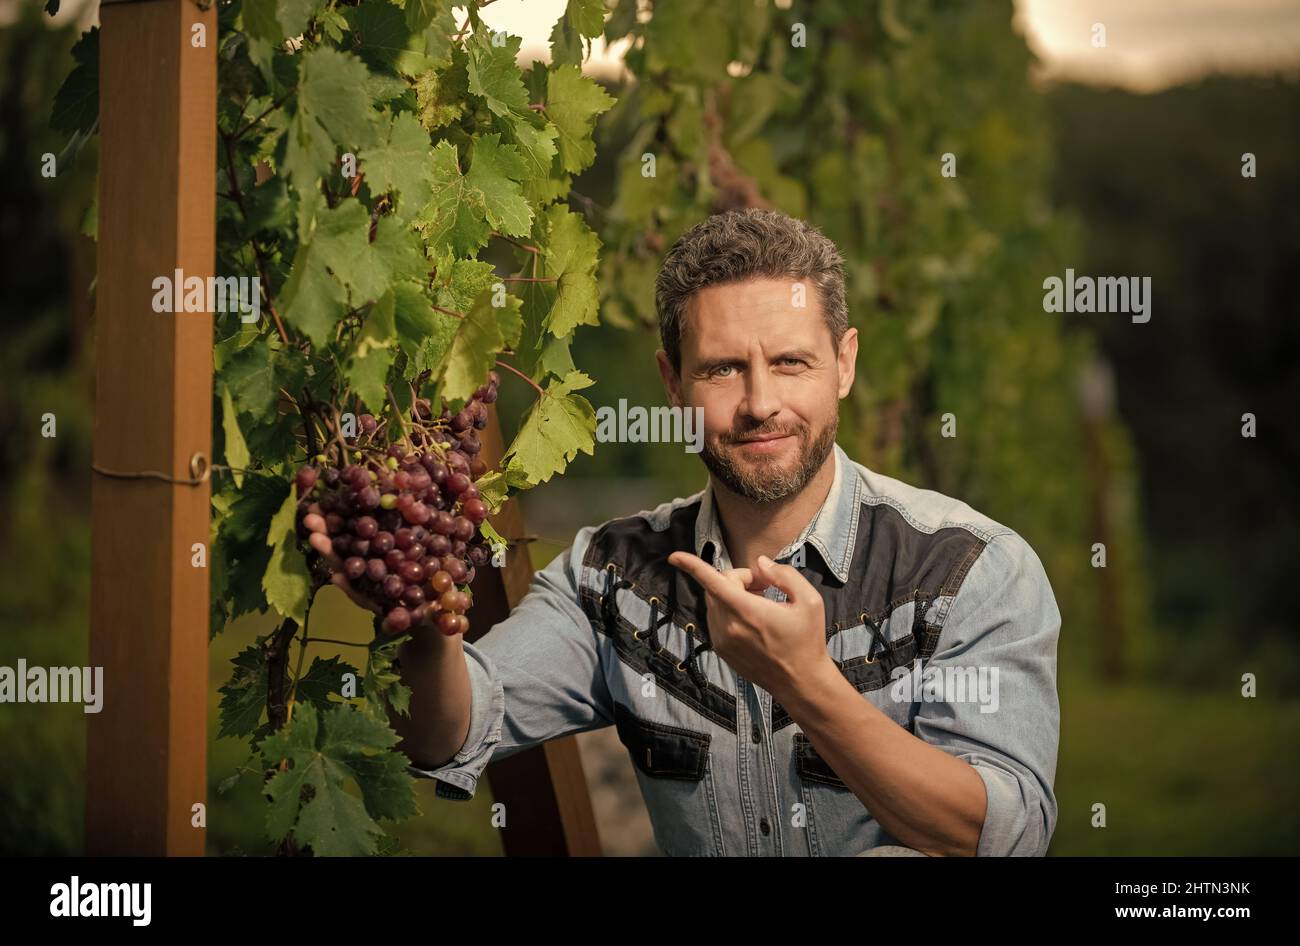 vinedresser with grapes bunch. male vineyard owner. professional winegrower on grape farm Stock Photo